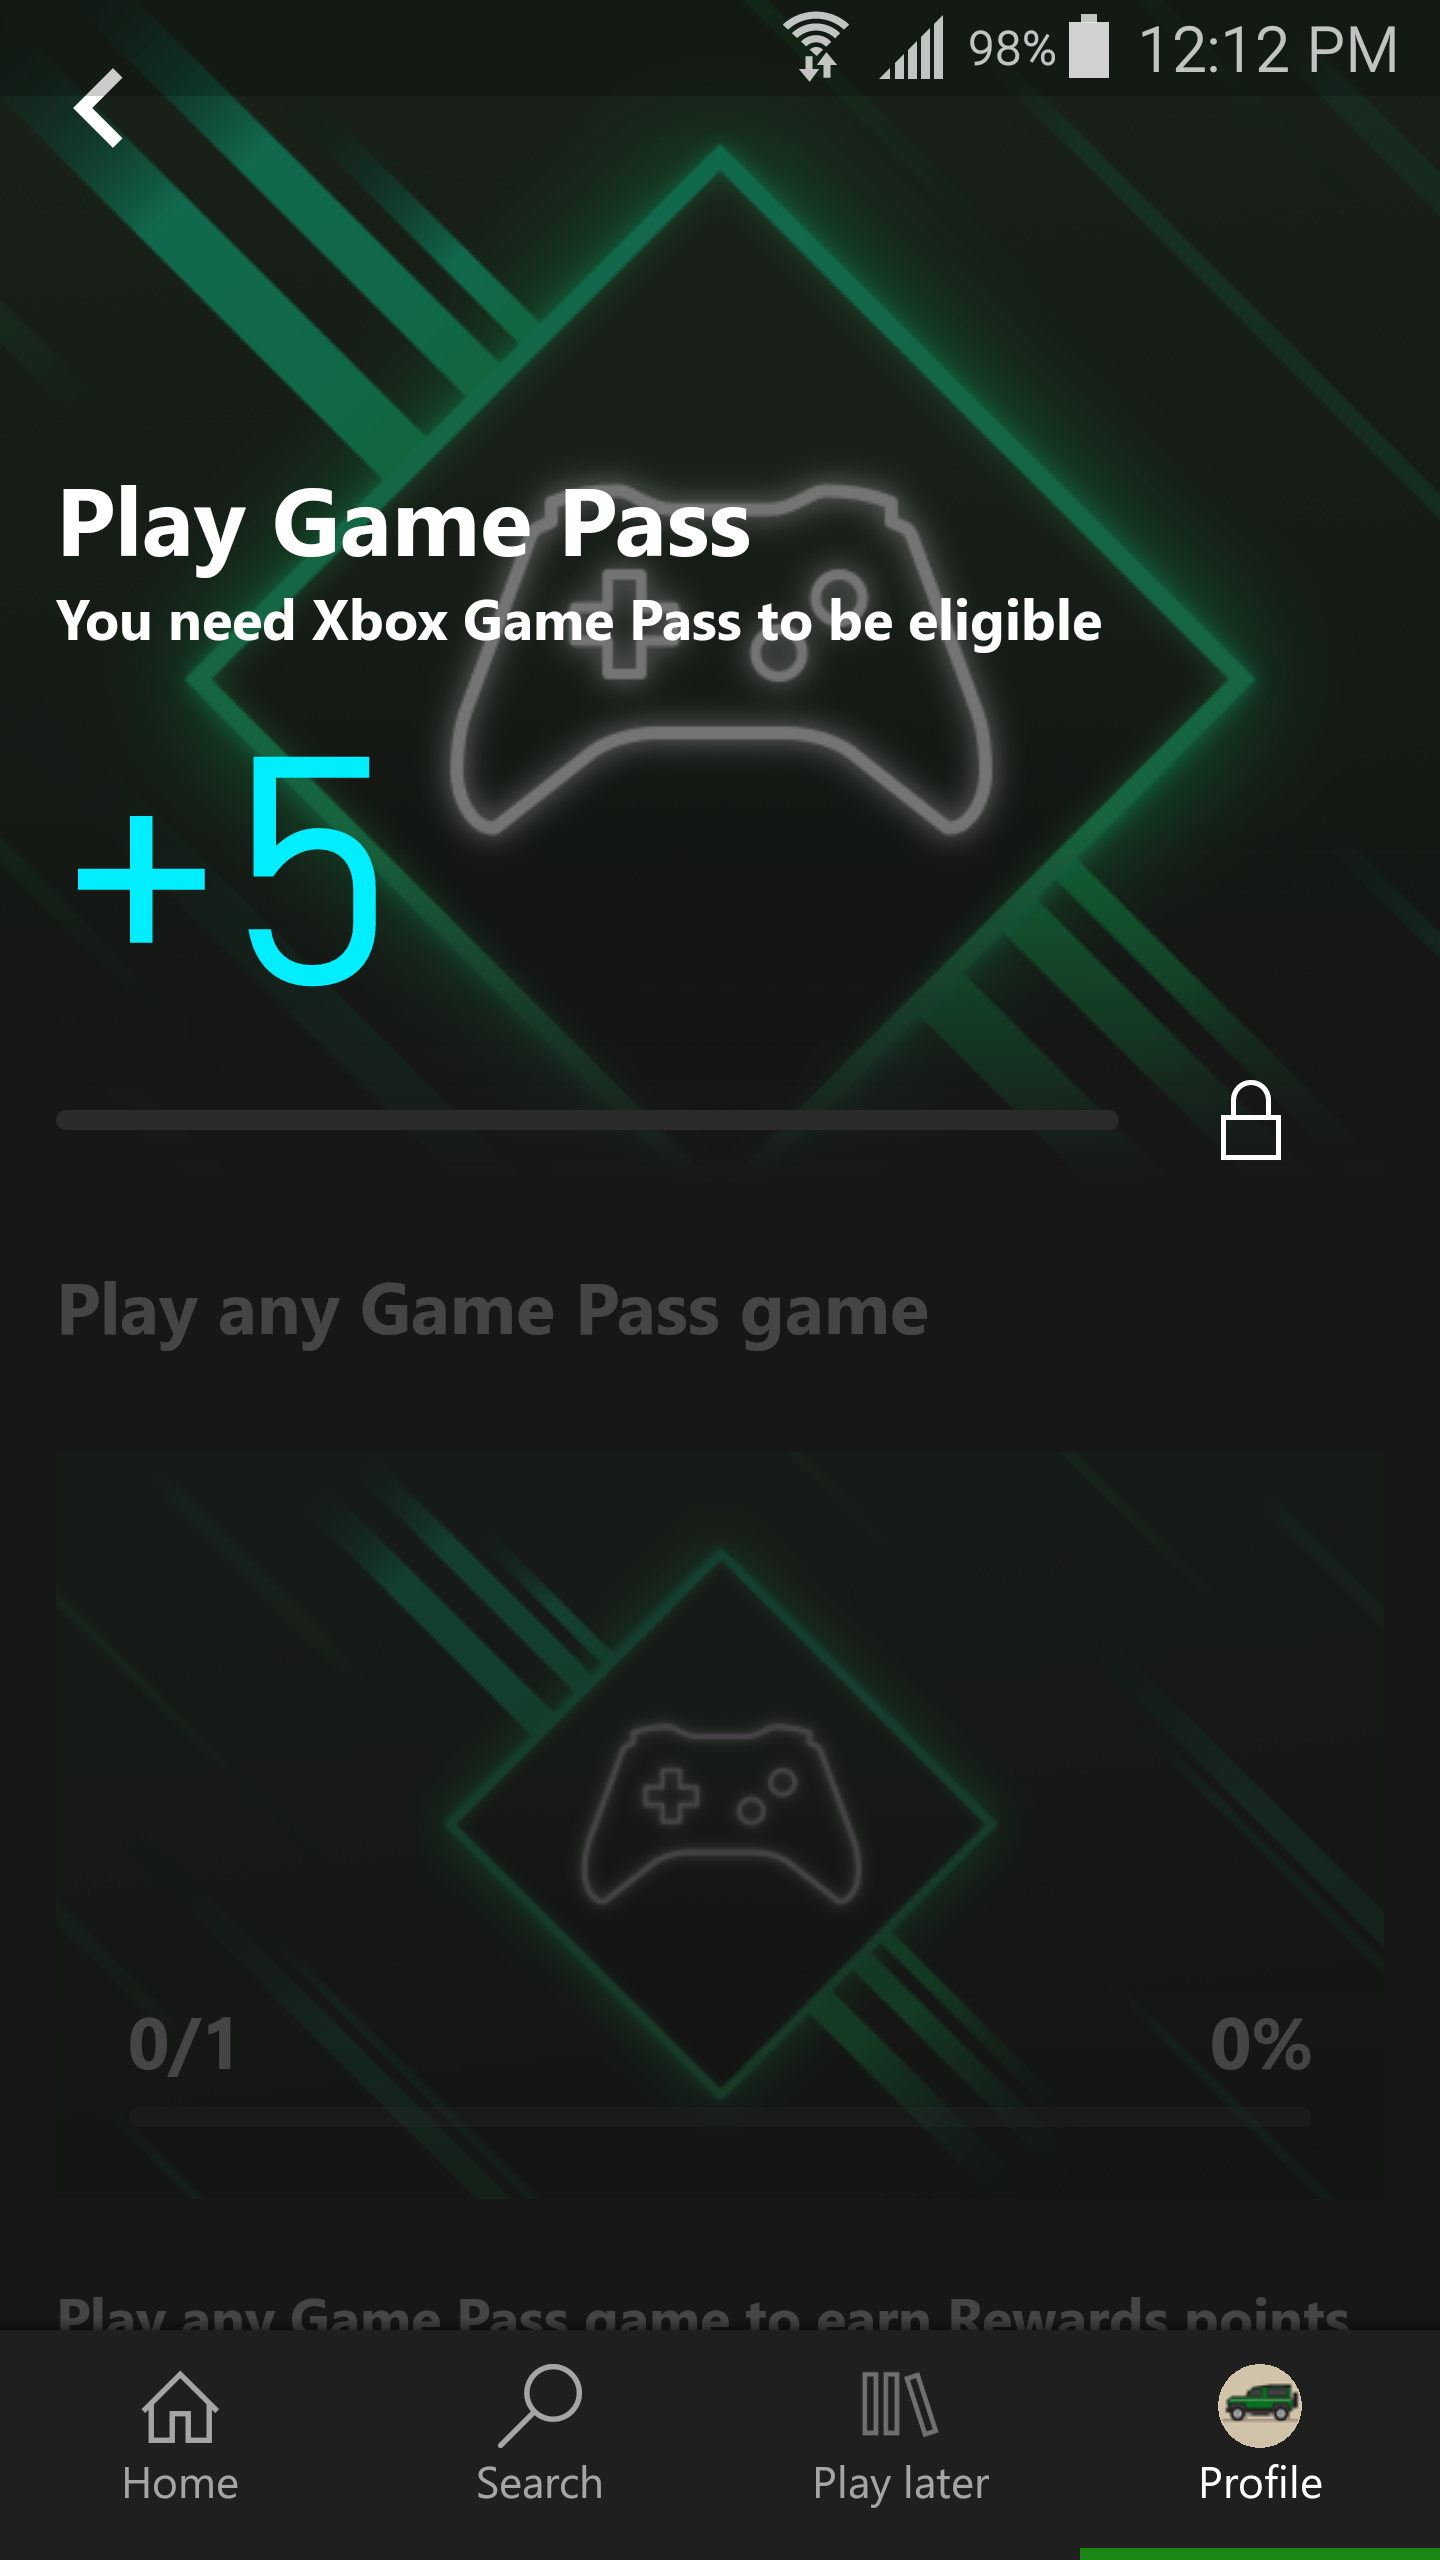 Xbox Game Pass Quests: Play Games & Earn Rewards